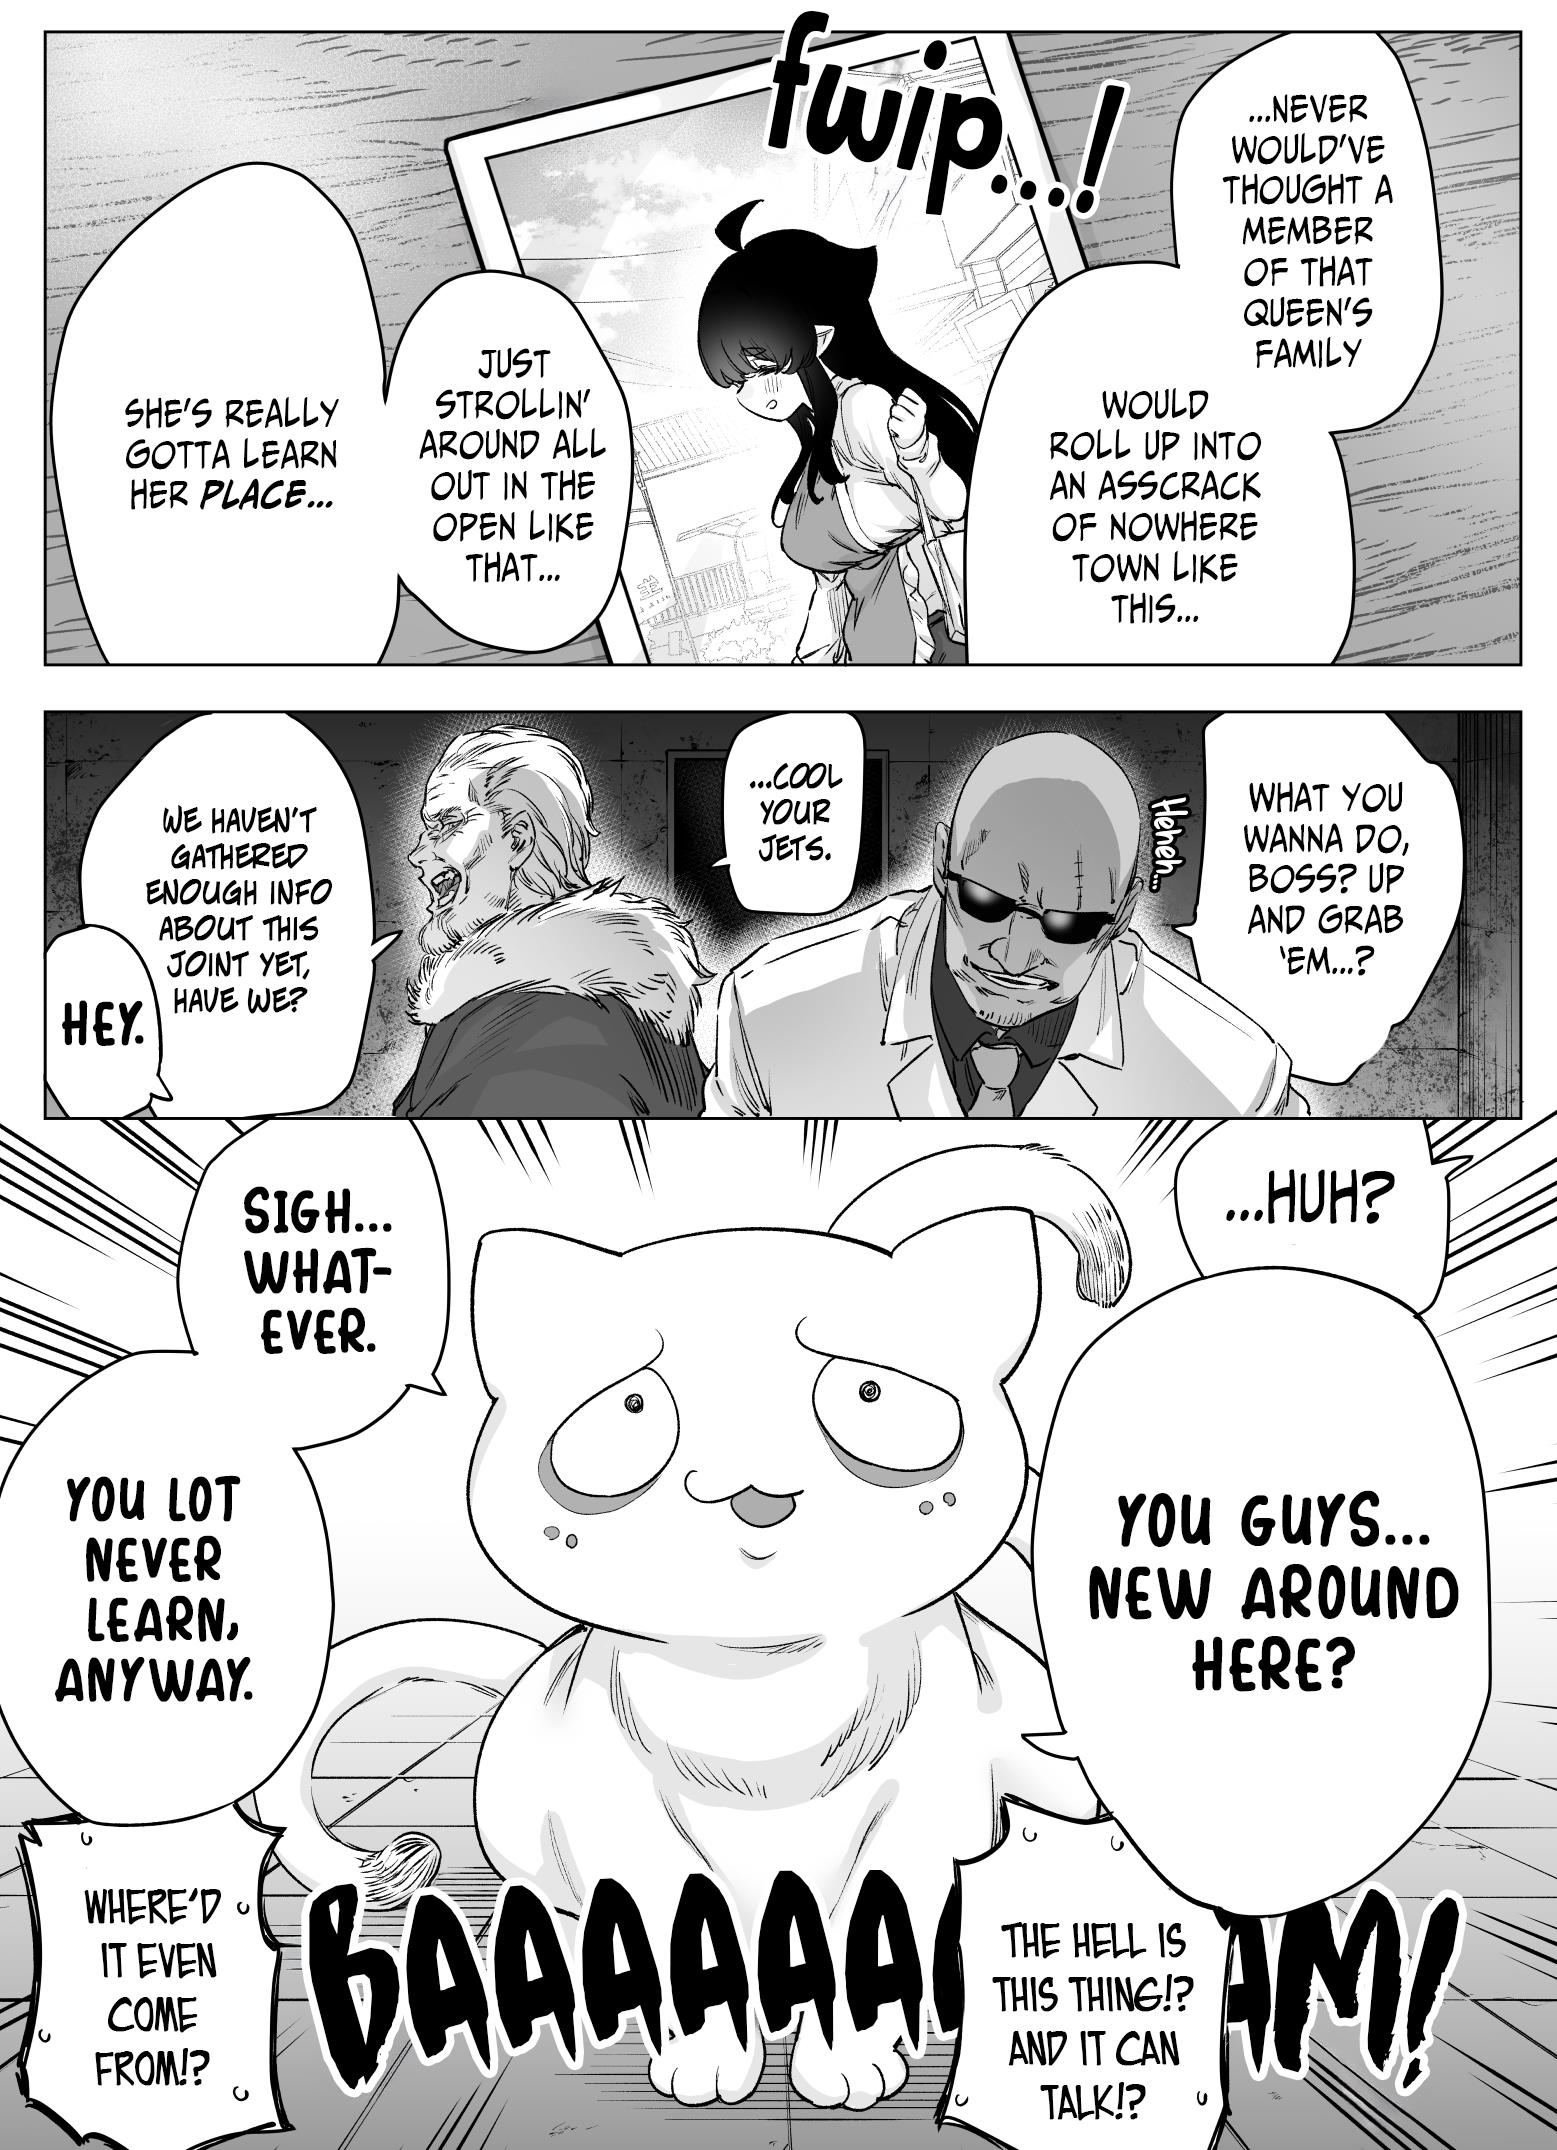 Even Though She's The Losing Heroine, The Bakeneko-Chan Remains Undaunted - Page 1